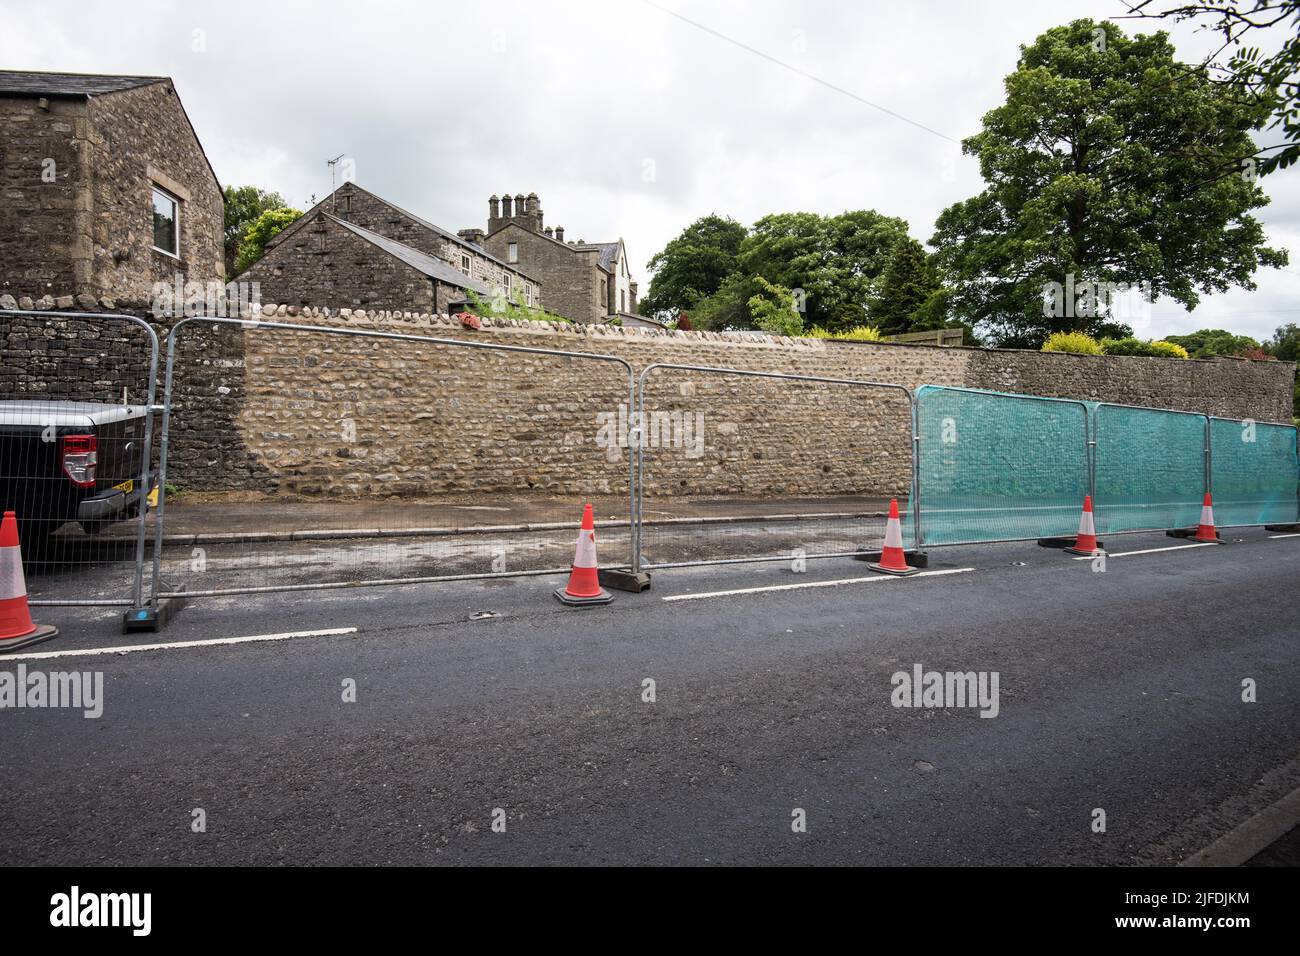 Final day with wall completed & repaired ahead of schedule (at 1/7/22) Kayley Hill Long Preston. Traffic lights taken down & traffic flow normal. Stock Photo